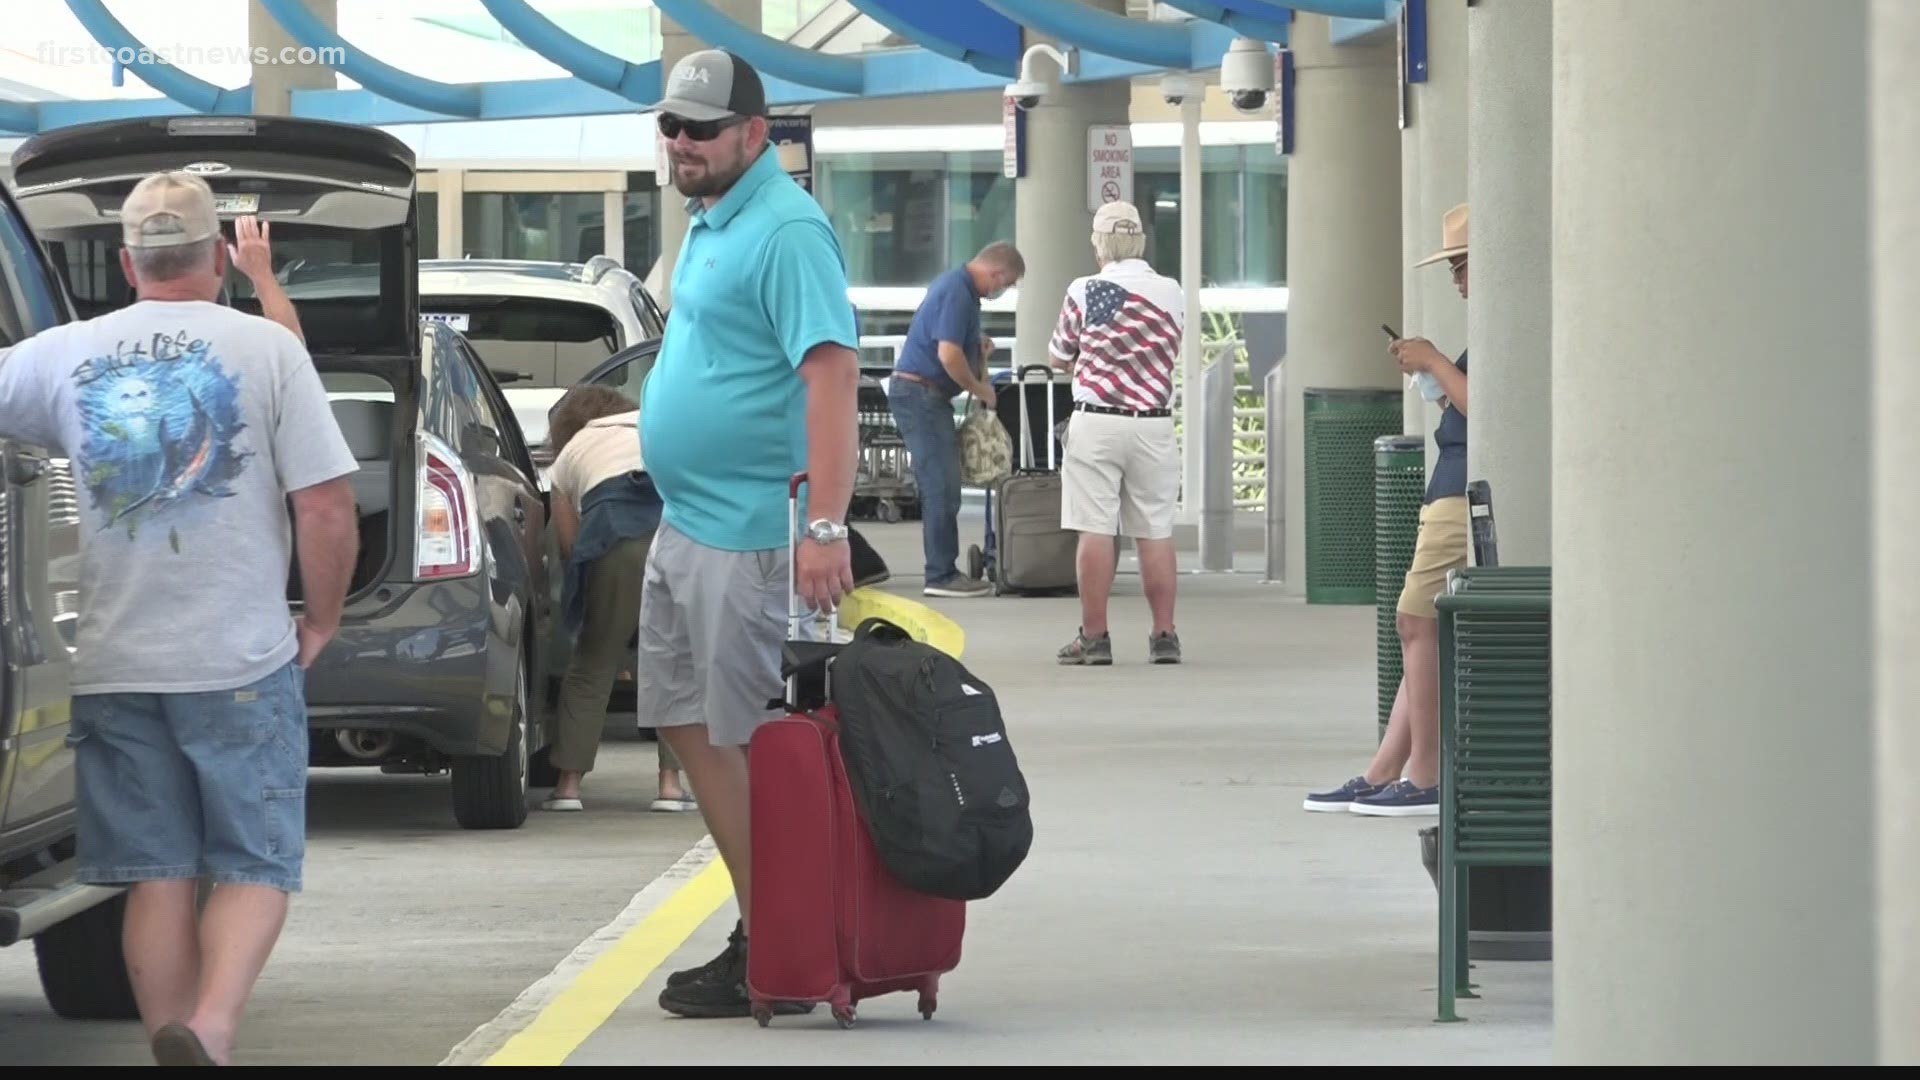 With evacuating busy airports can come an increase of anxiety. A UNF psychology professor says it's important to "control what you can" to keep stress low.